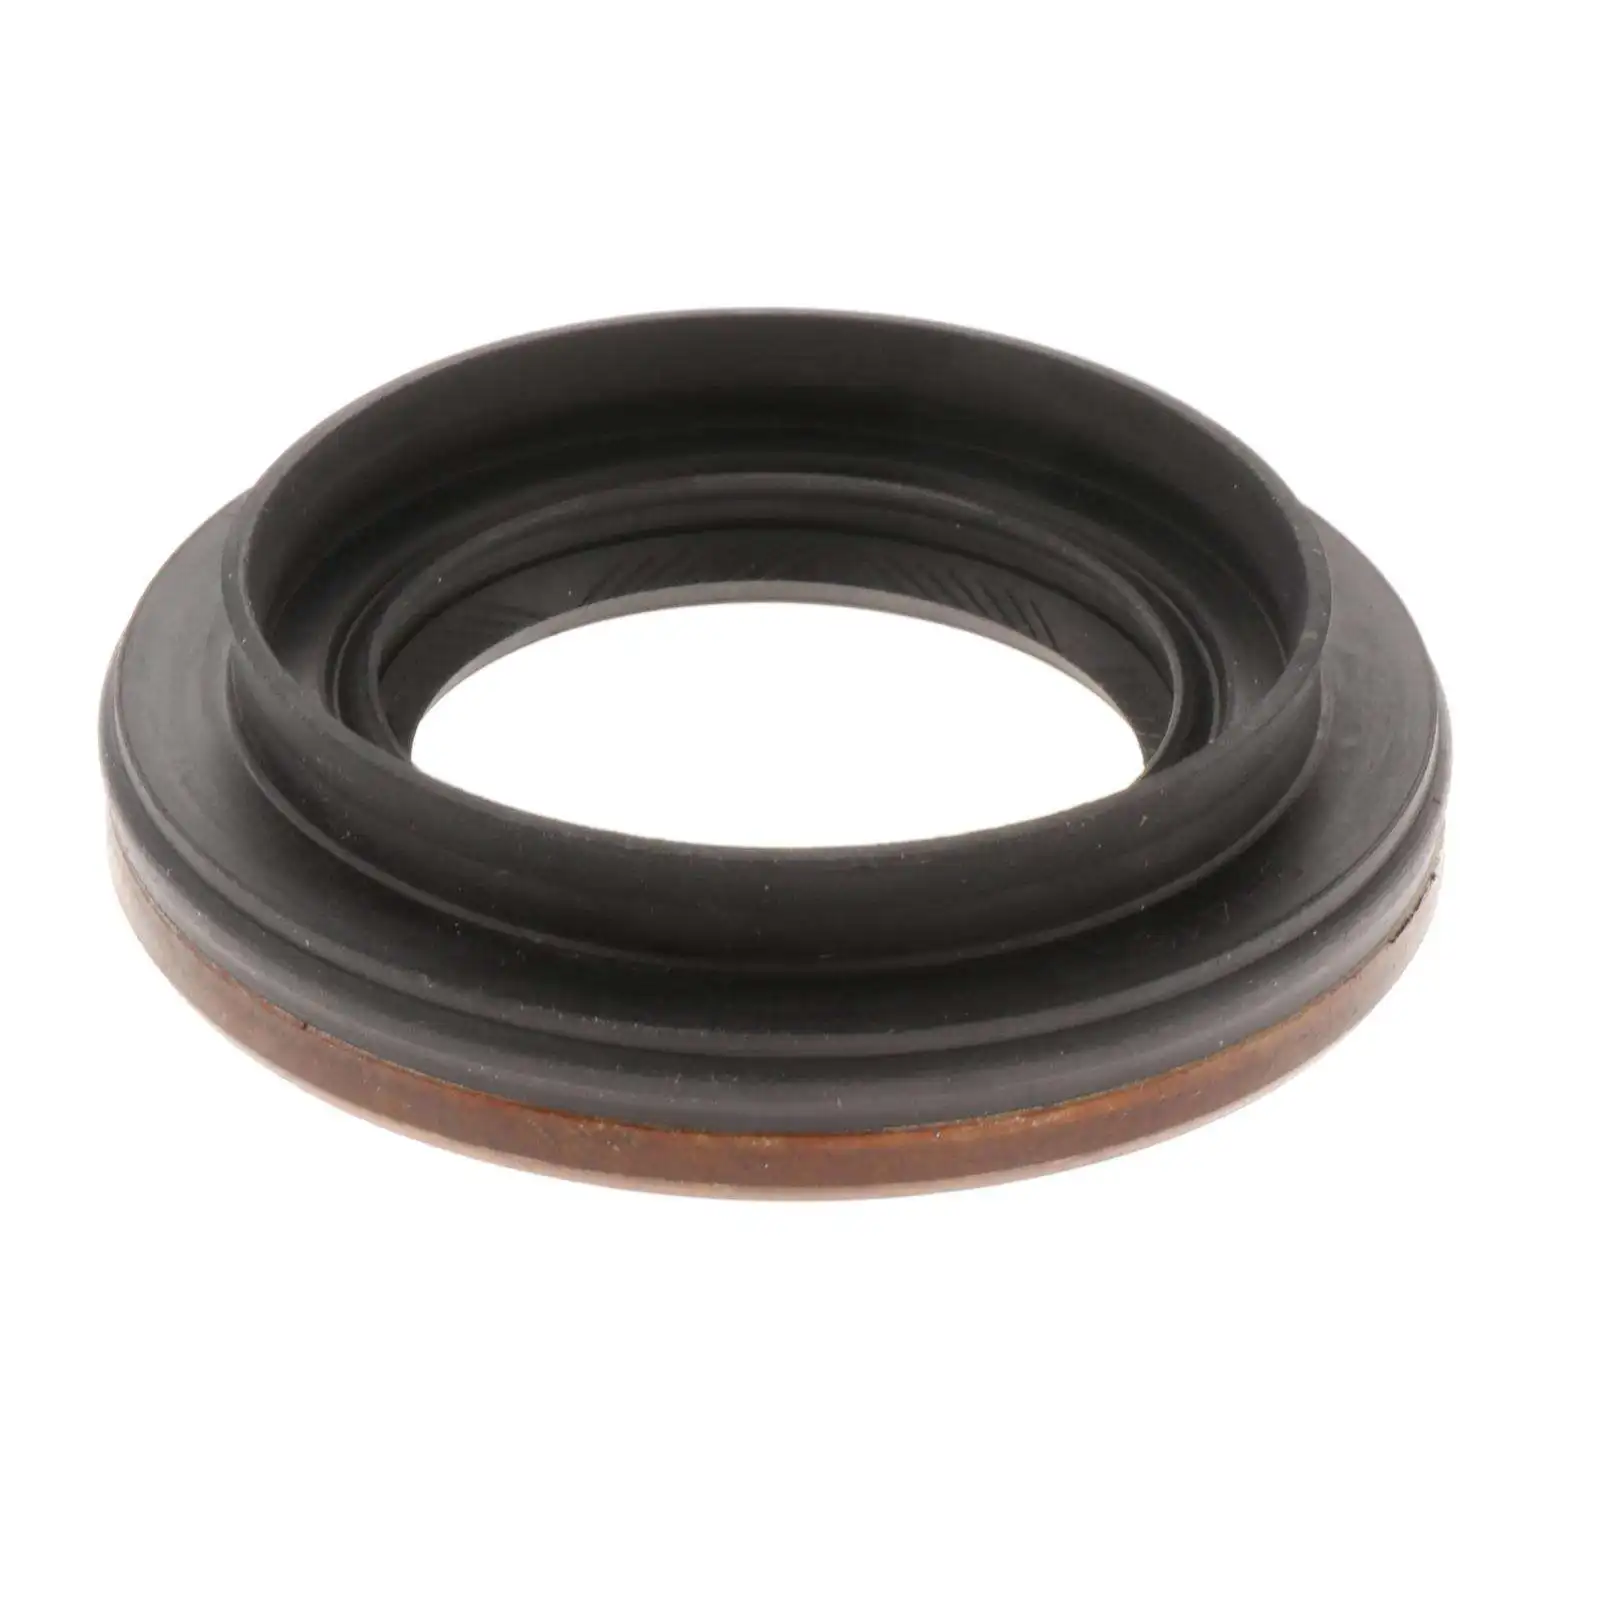 CVT Transmission Right Half Shaft Oil Seal Rubber Axle Shaft Oil Seal for Nissan for Qi Jun 2.5 Spare Parts Accessories